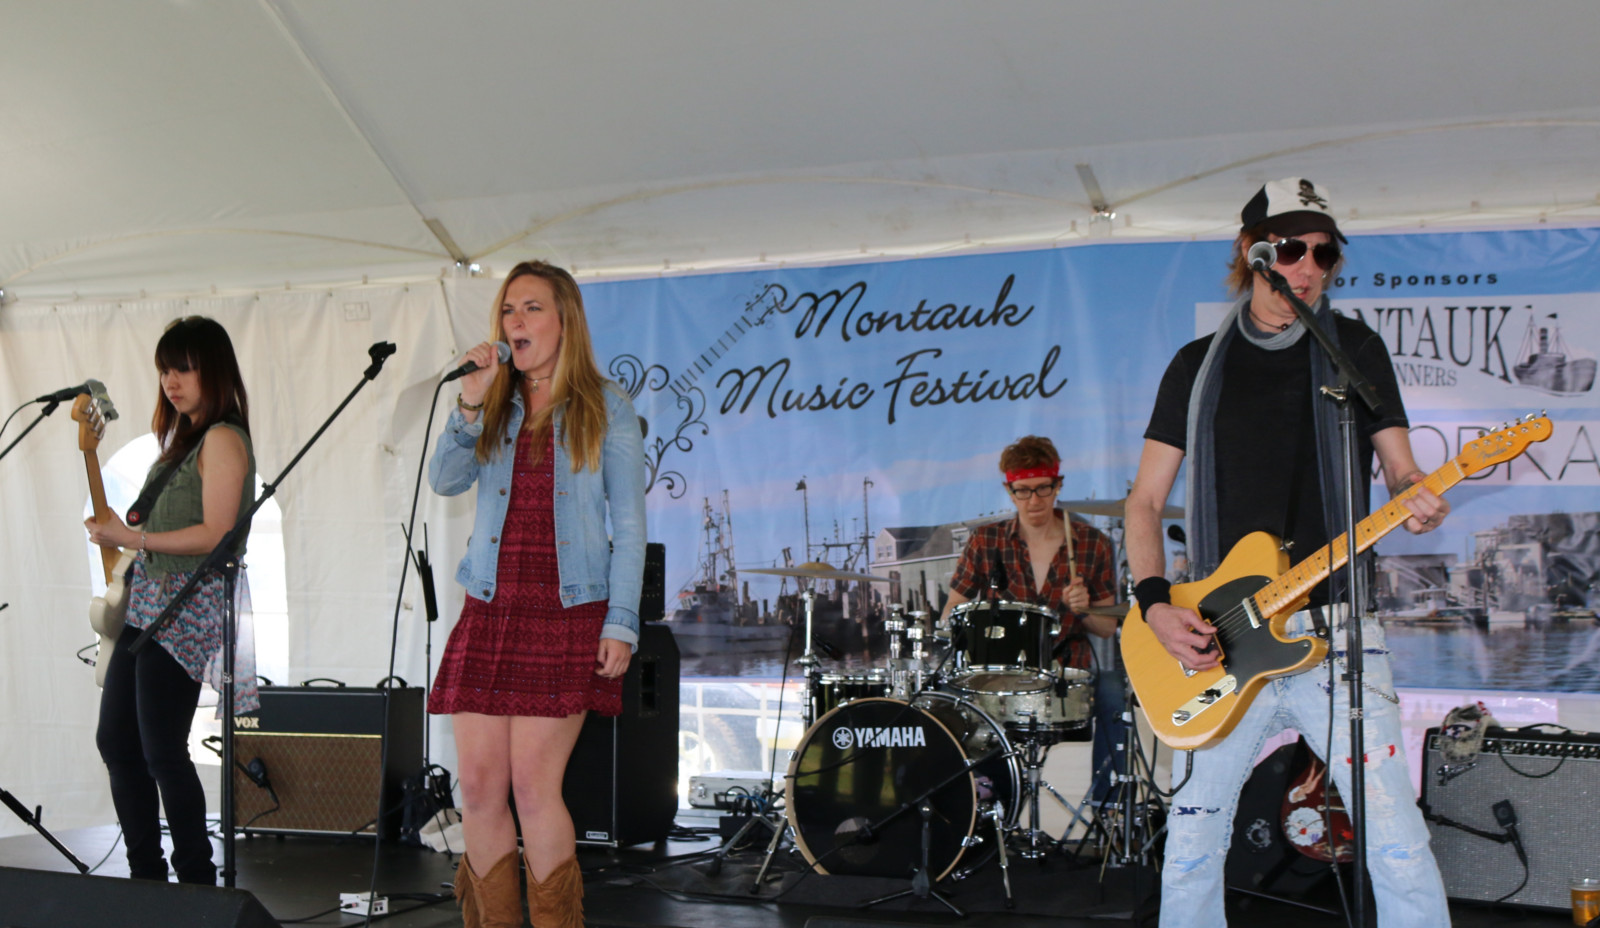 Performers on stage at the Montauk Music Festival